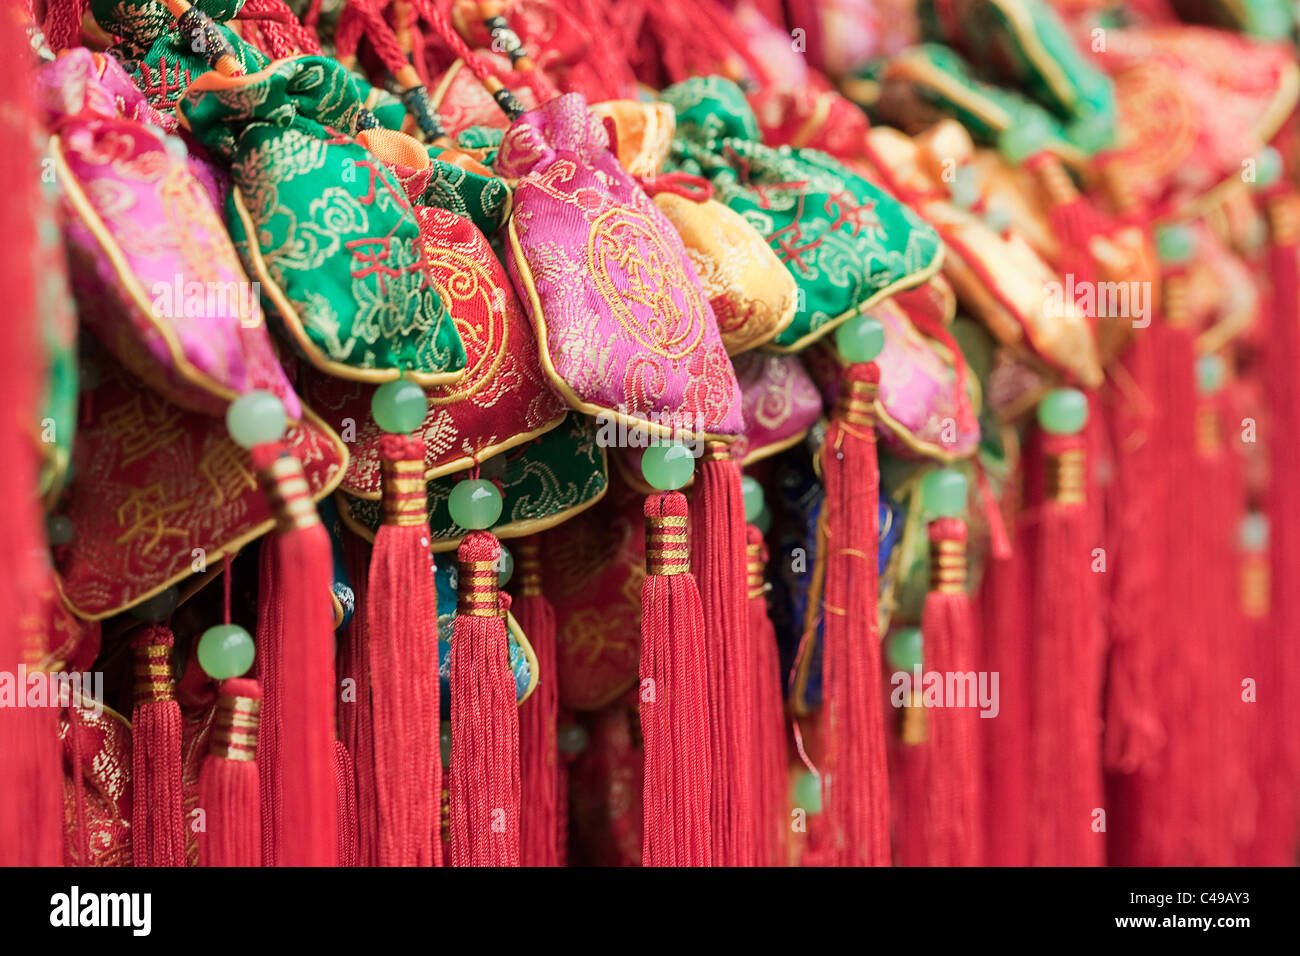 Close up of colorful souvenirs in Jinli street market, Chengdu, Sichuan Province, China Stock Photo